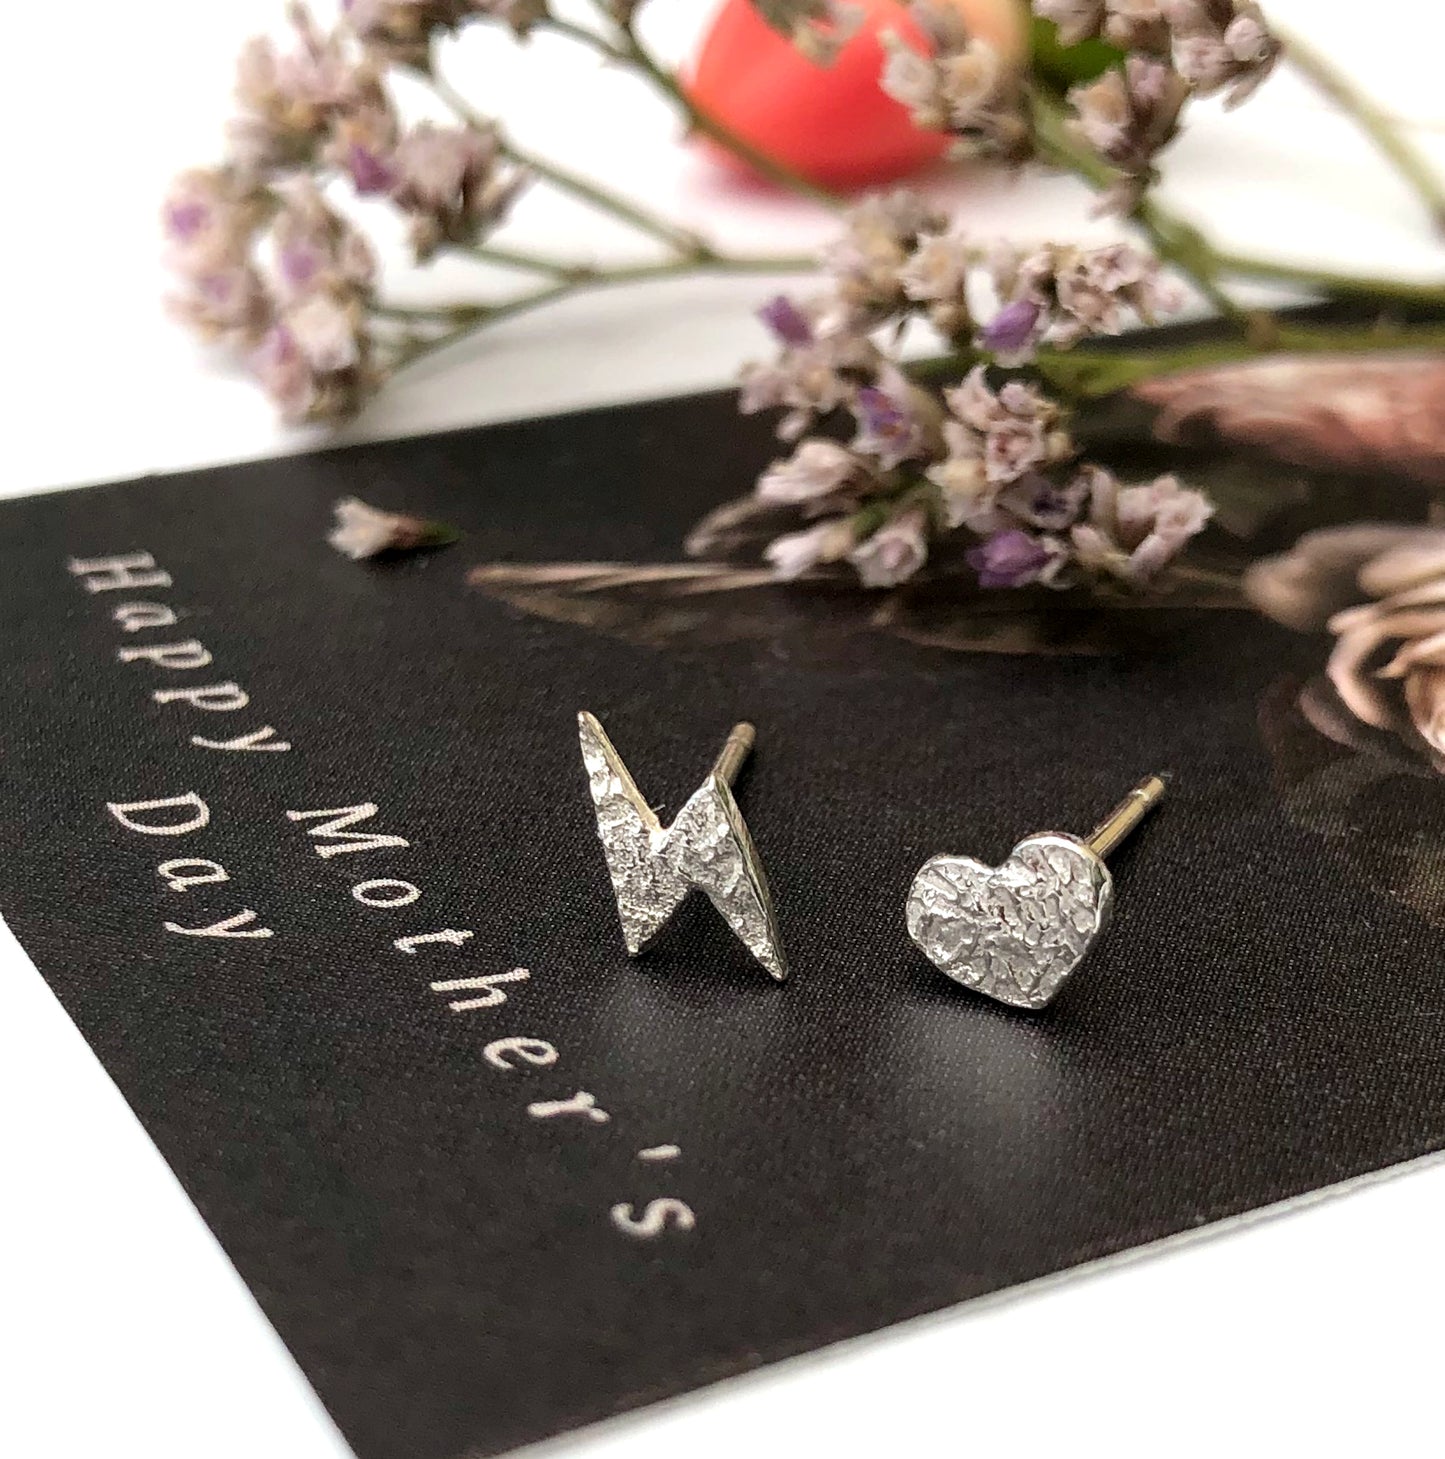 Heart And Lightning Bolt Earrings, Sterling Silver Small Mismatched Stud Earrings